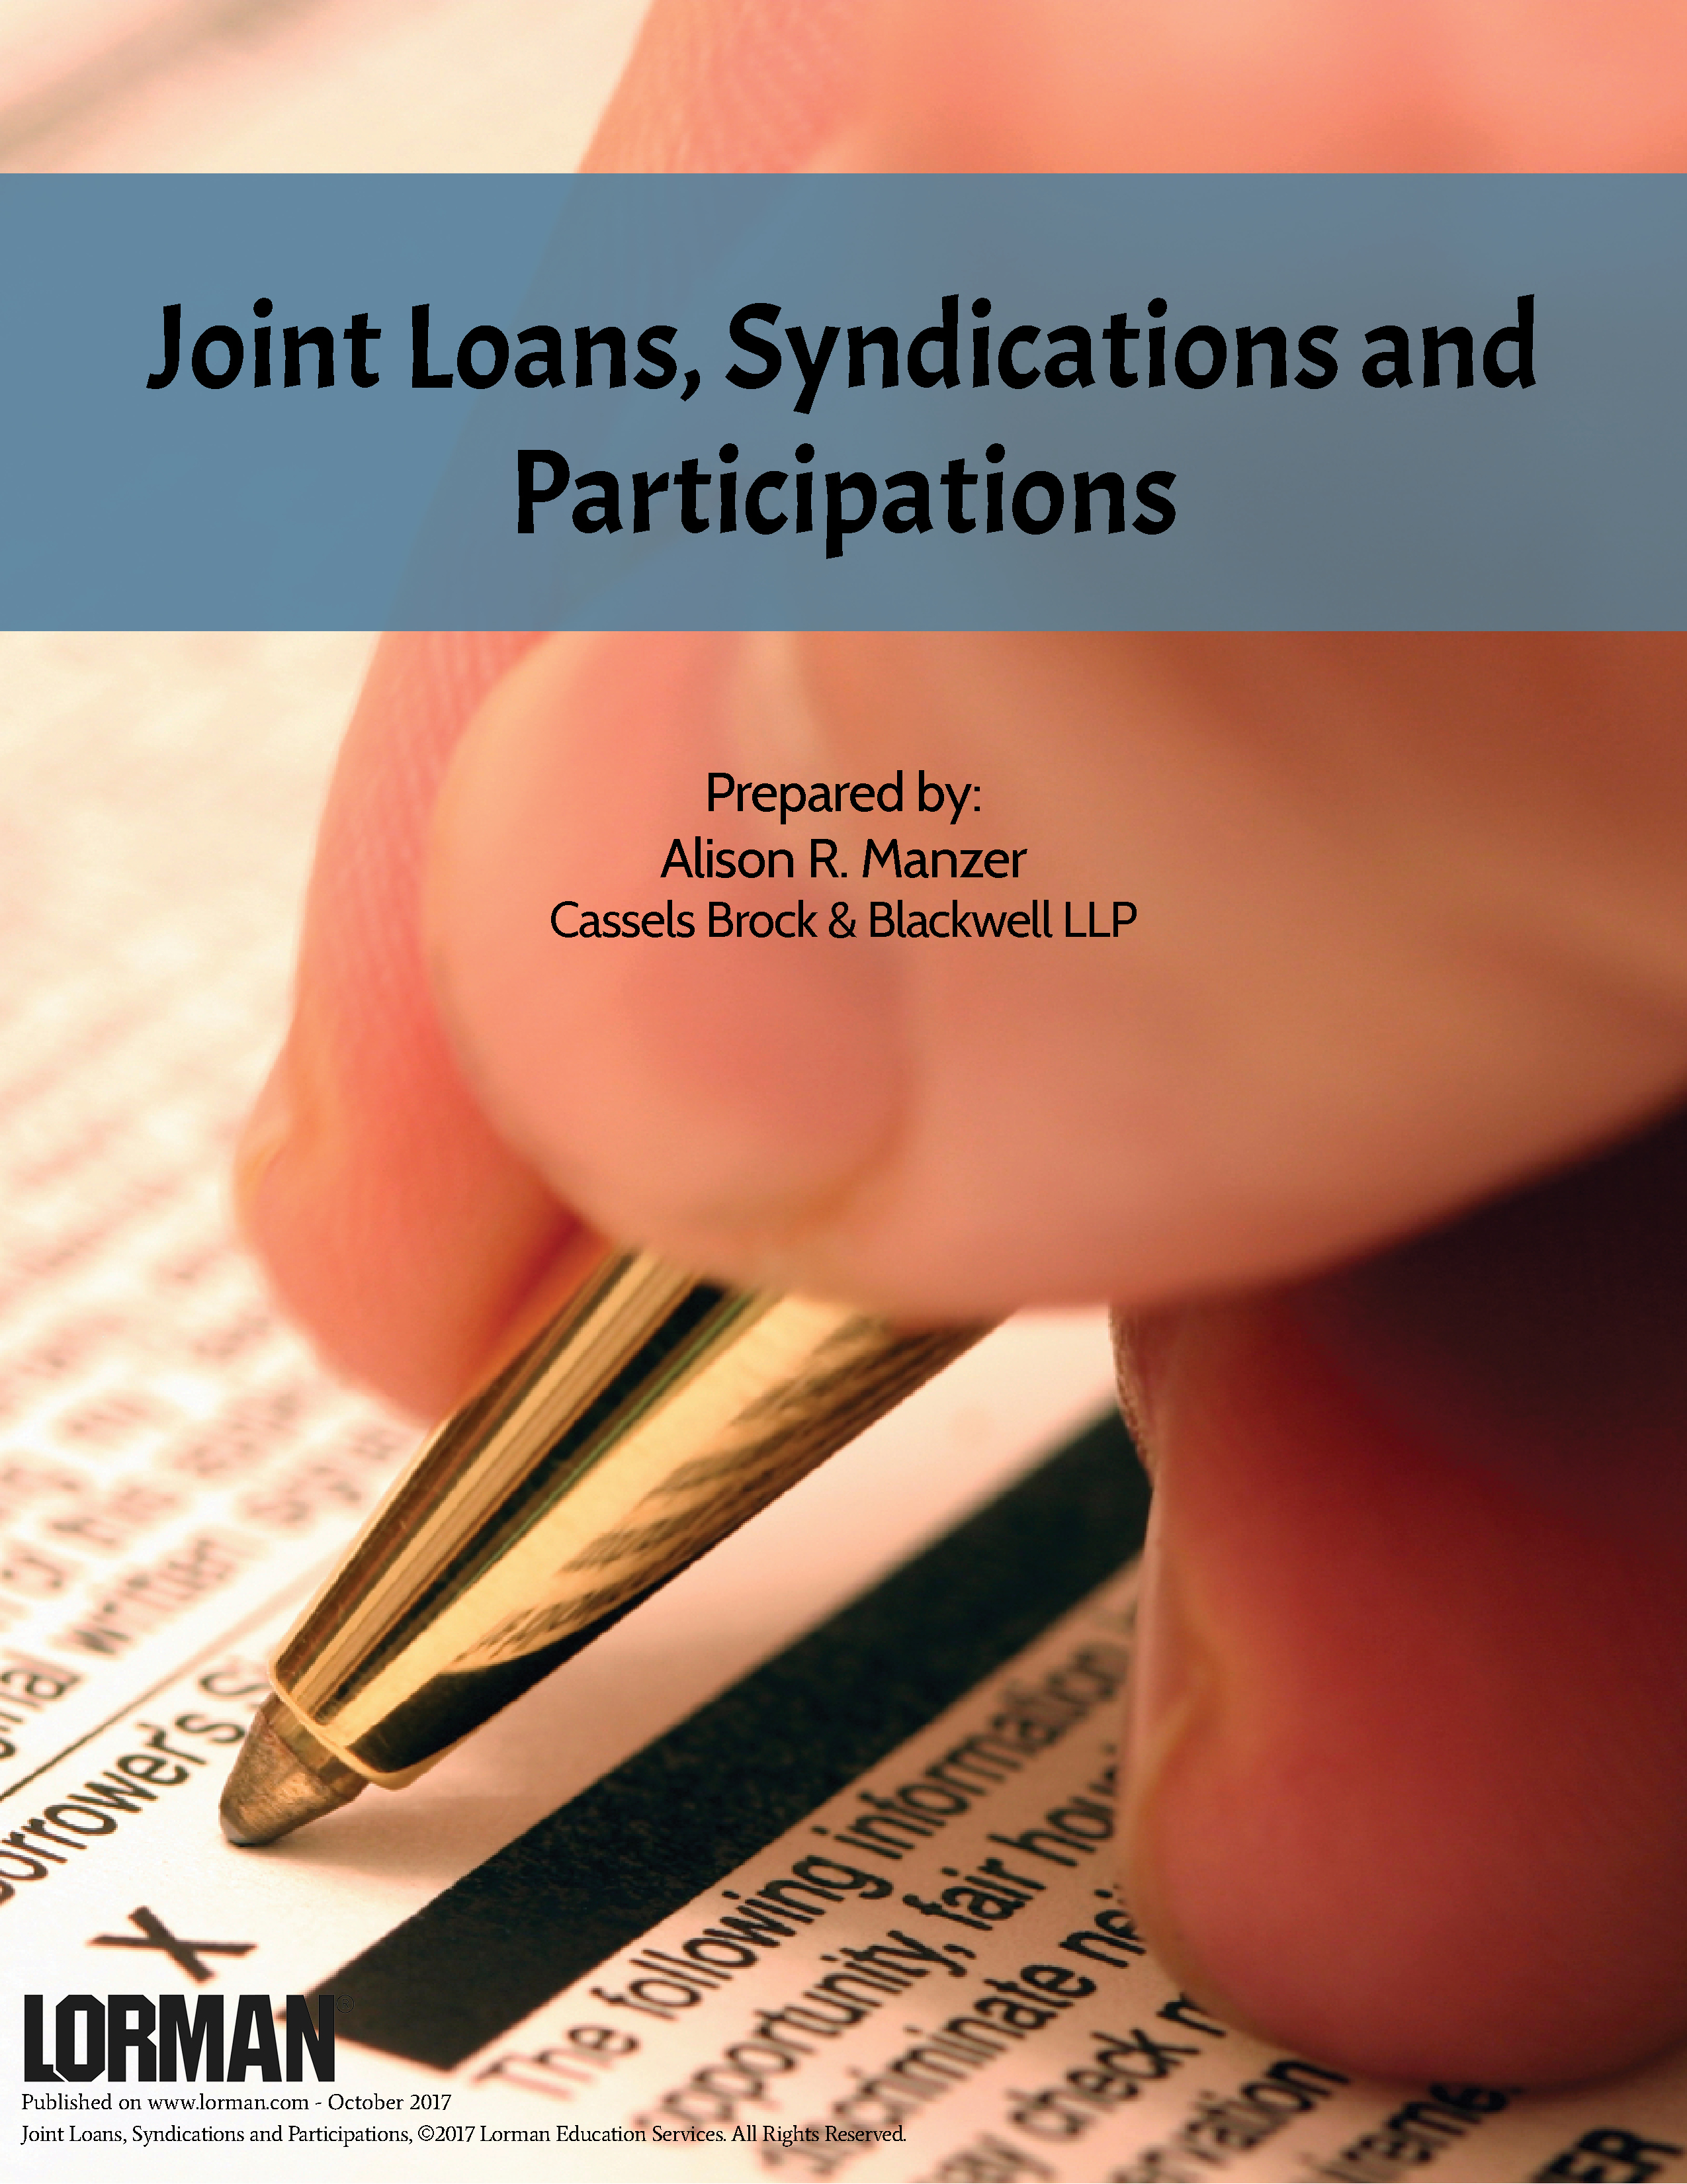 Joint Loans, Syndications and Participations